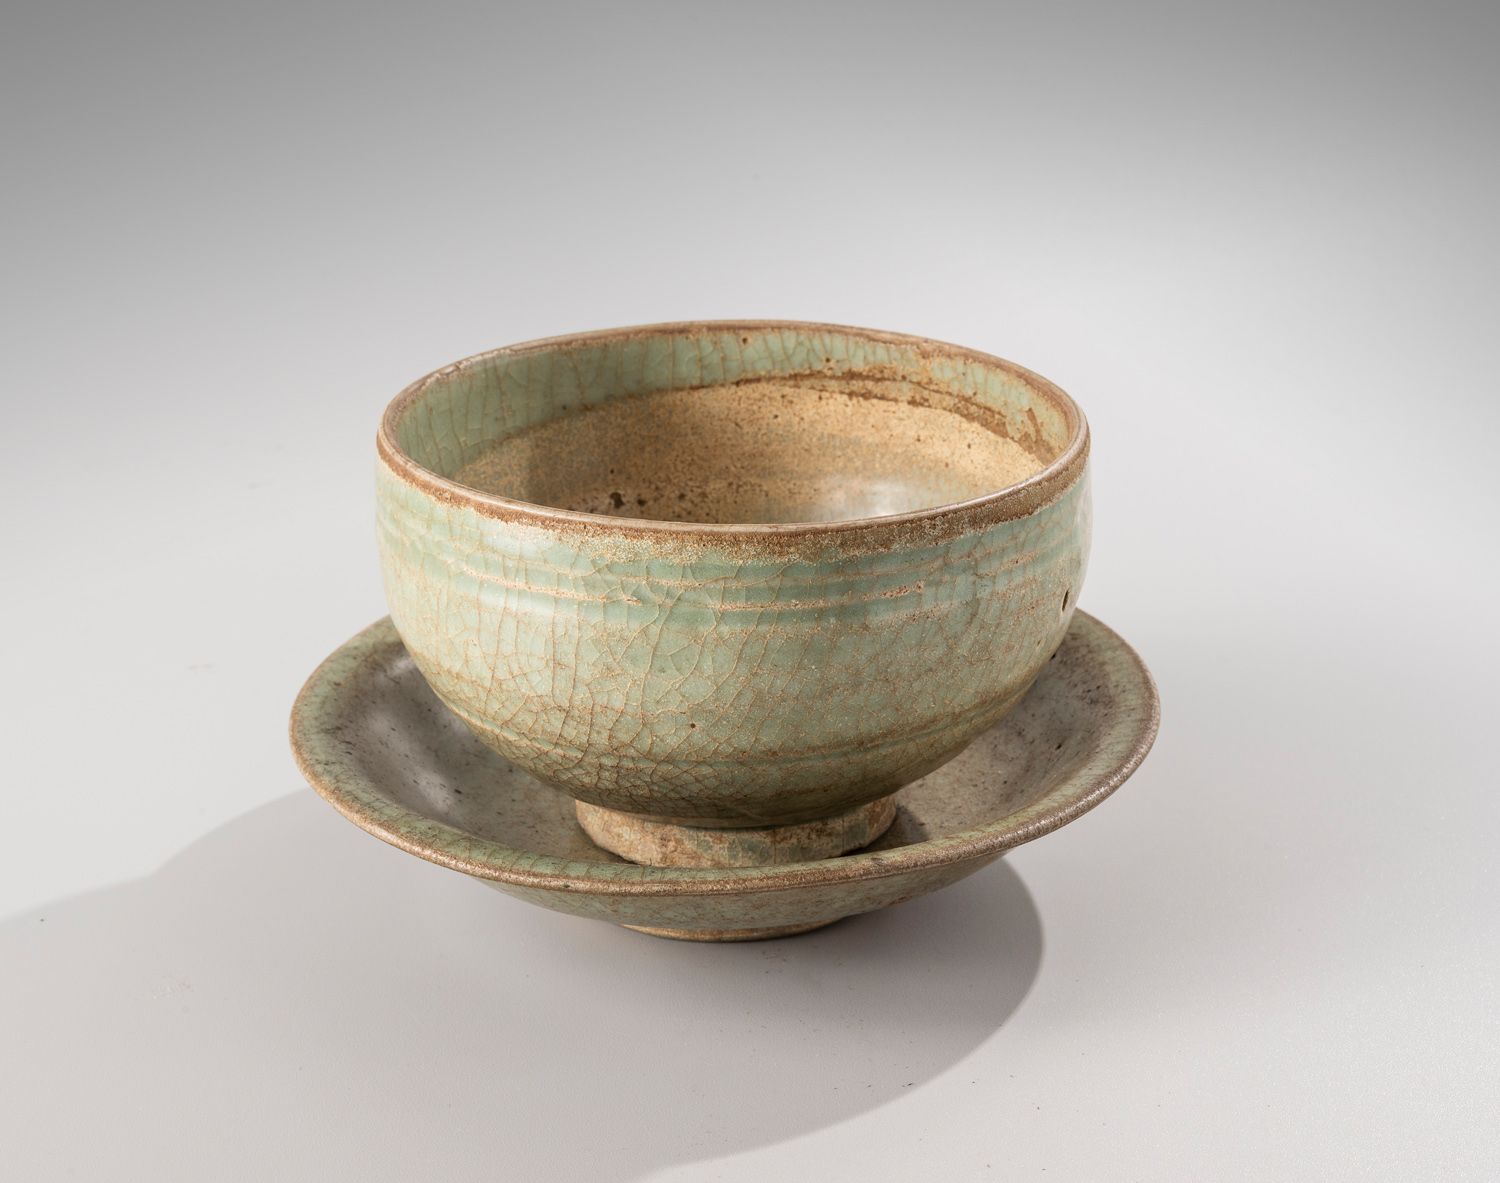 Null CHINA, Ming period, 15th-16th century

Celadon glazed ceramic bowl and cup,&hellip;